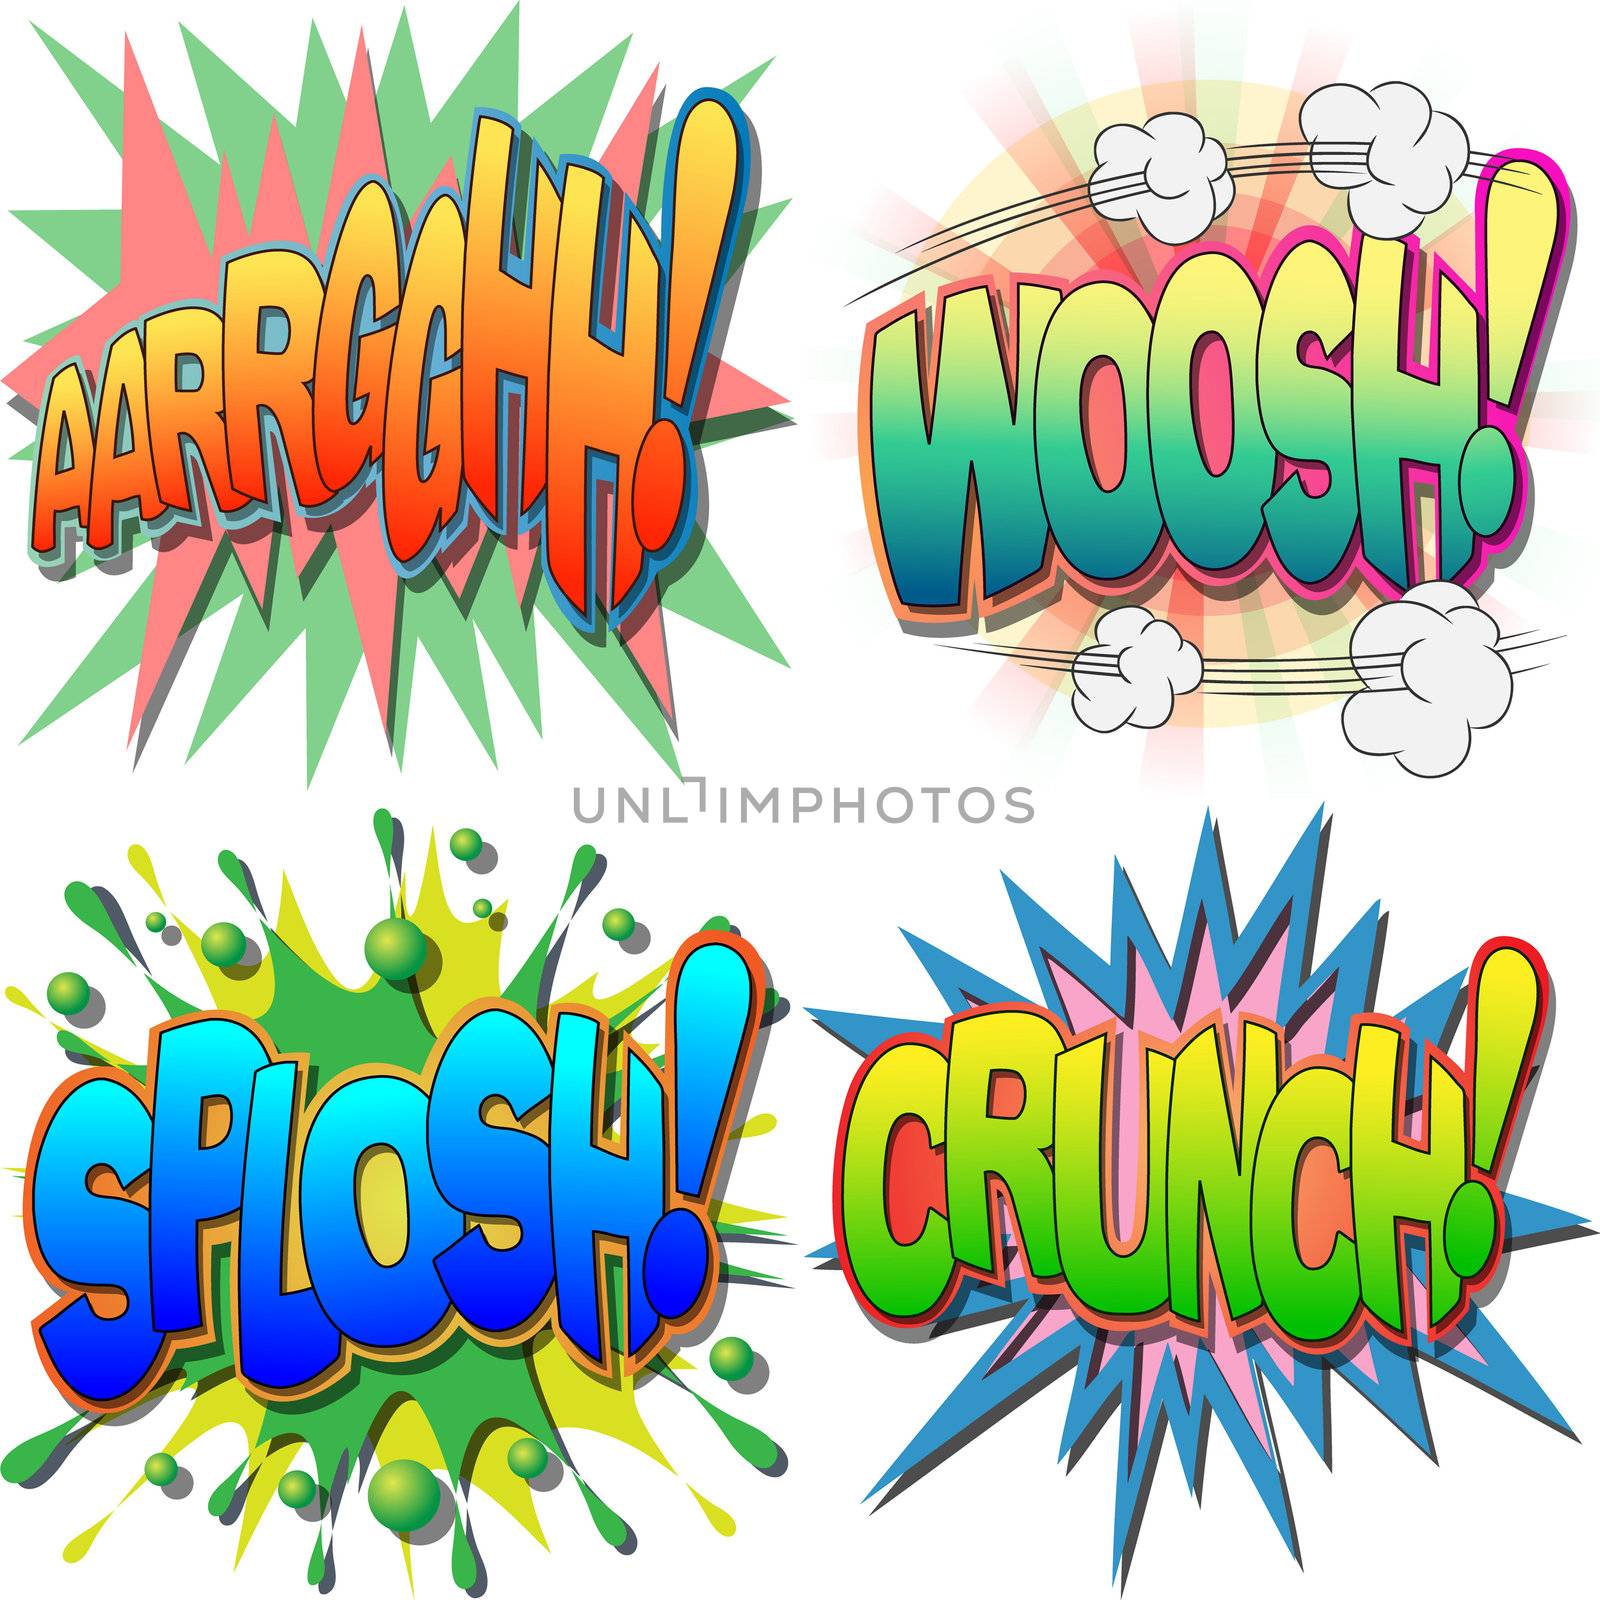 
A Selection of Comic Book Exclamations and Action Words, Argh, Woosh, Splosh, Crunch